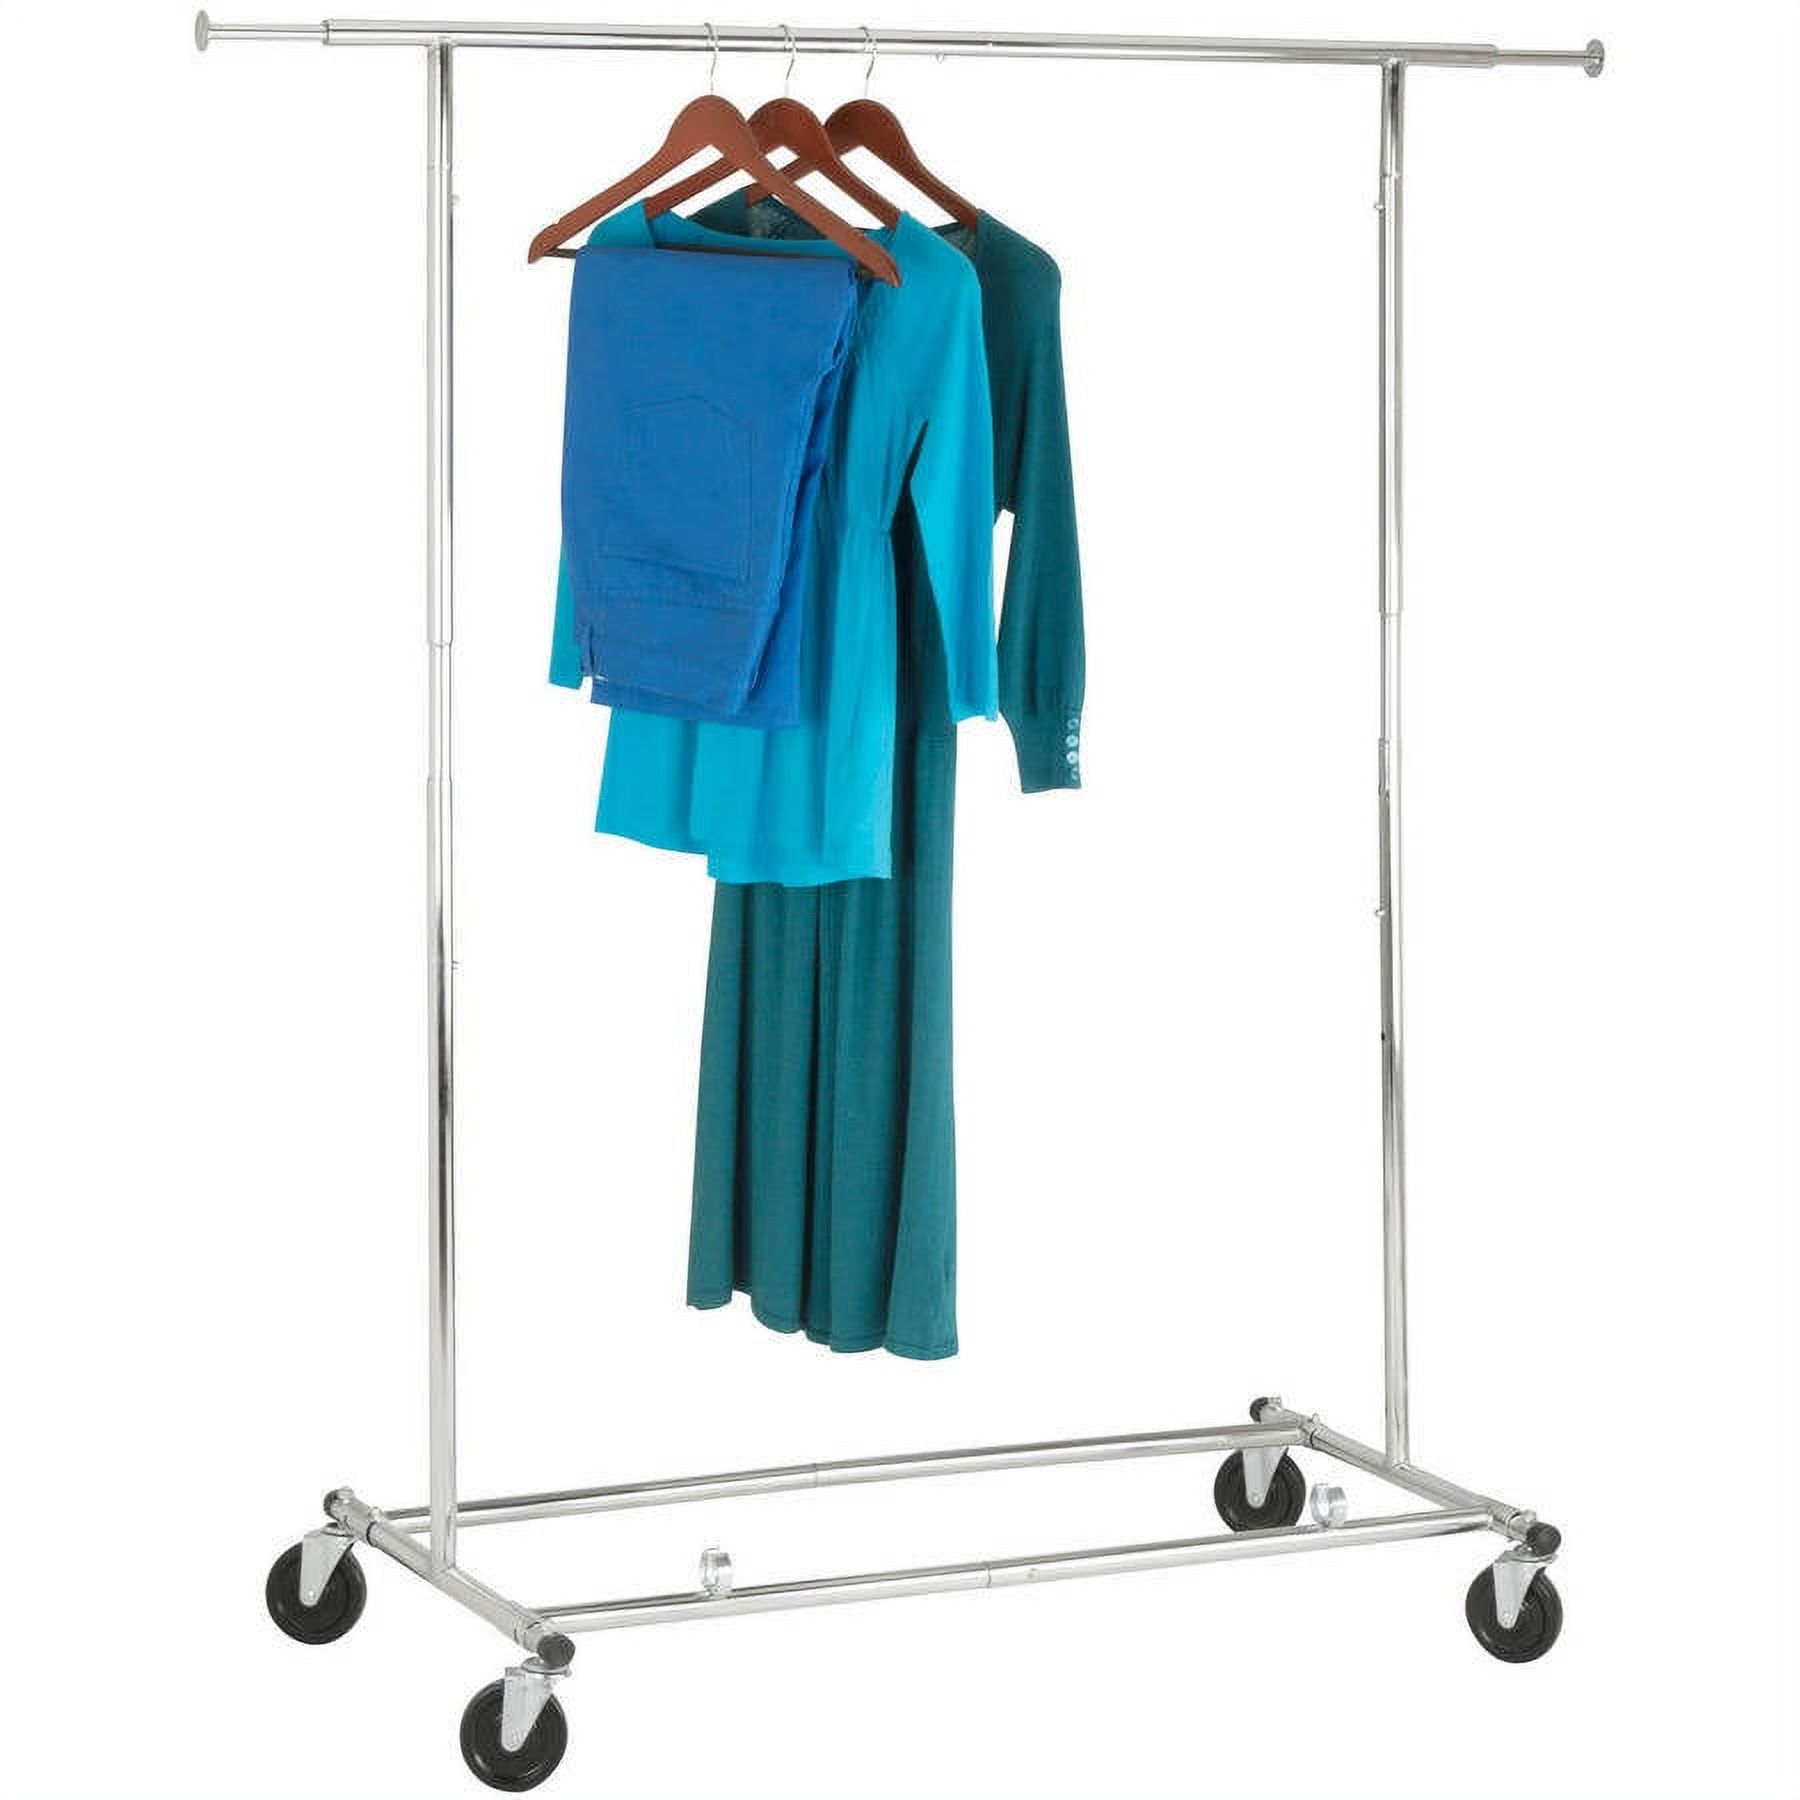 Honey-Can-Do Steel Folding Expandable Rolling Clothes Rack, Chrome - image 4 of 8